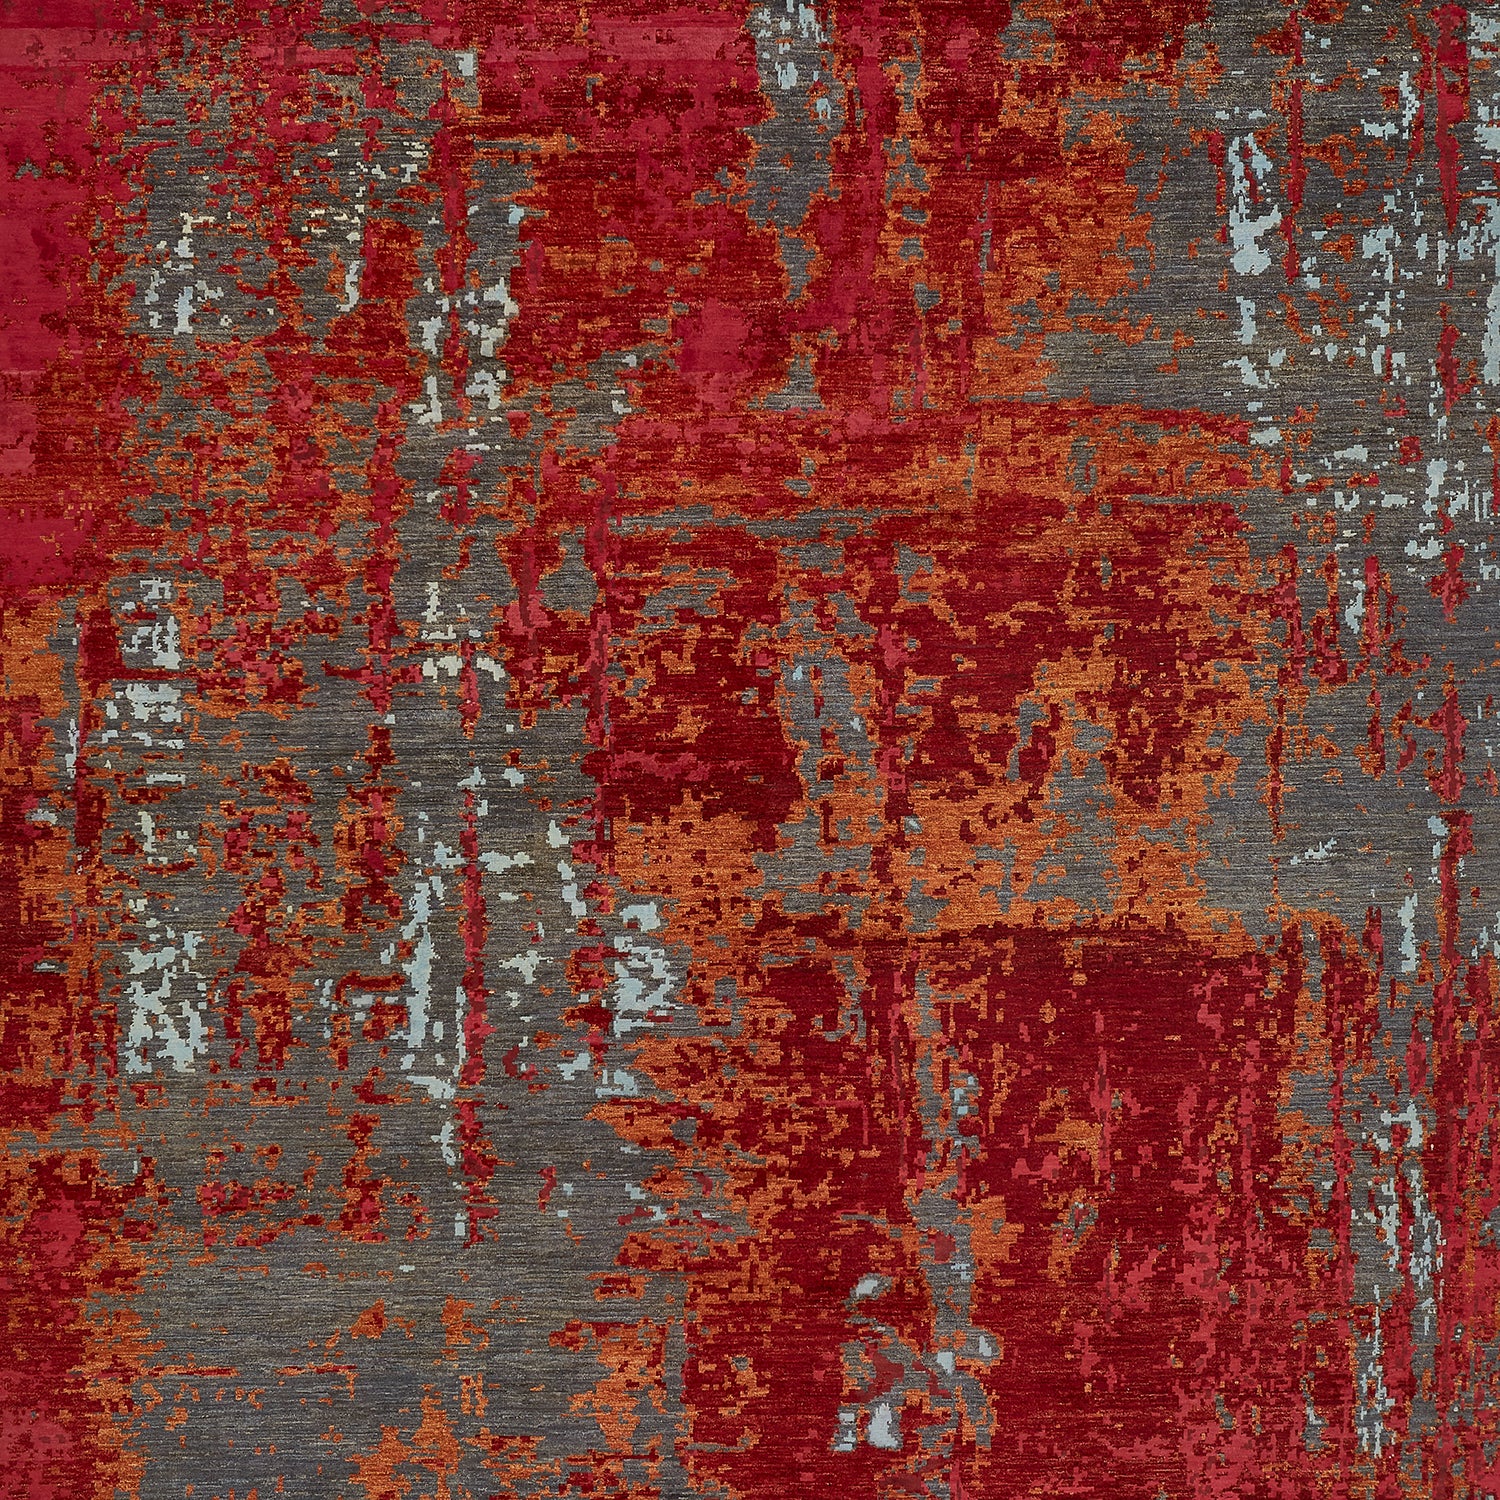 Abstract rug design with red, gray, orange, and cream patches.